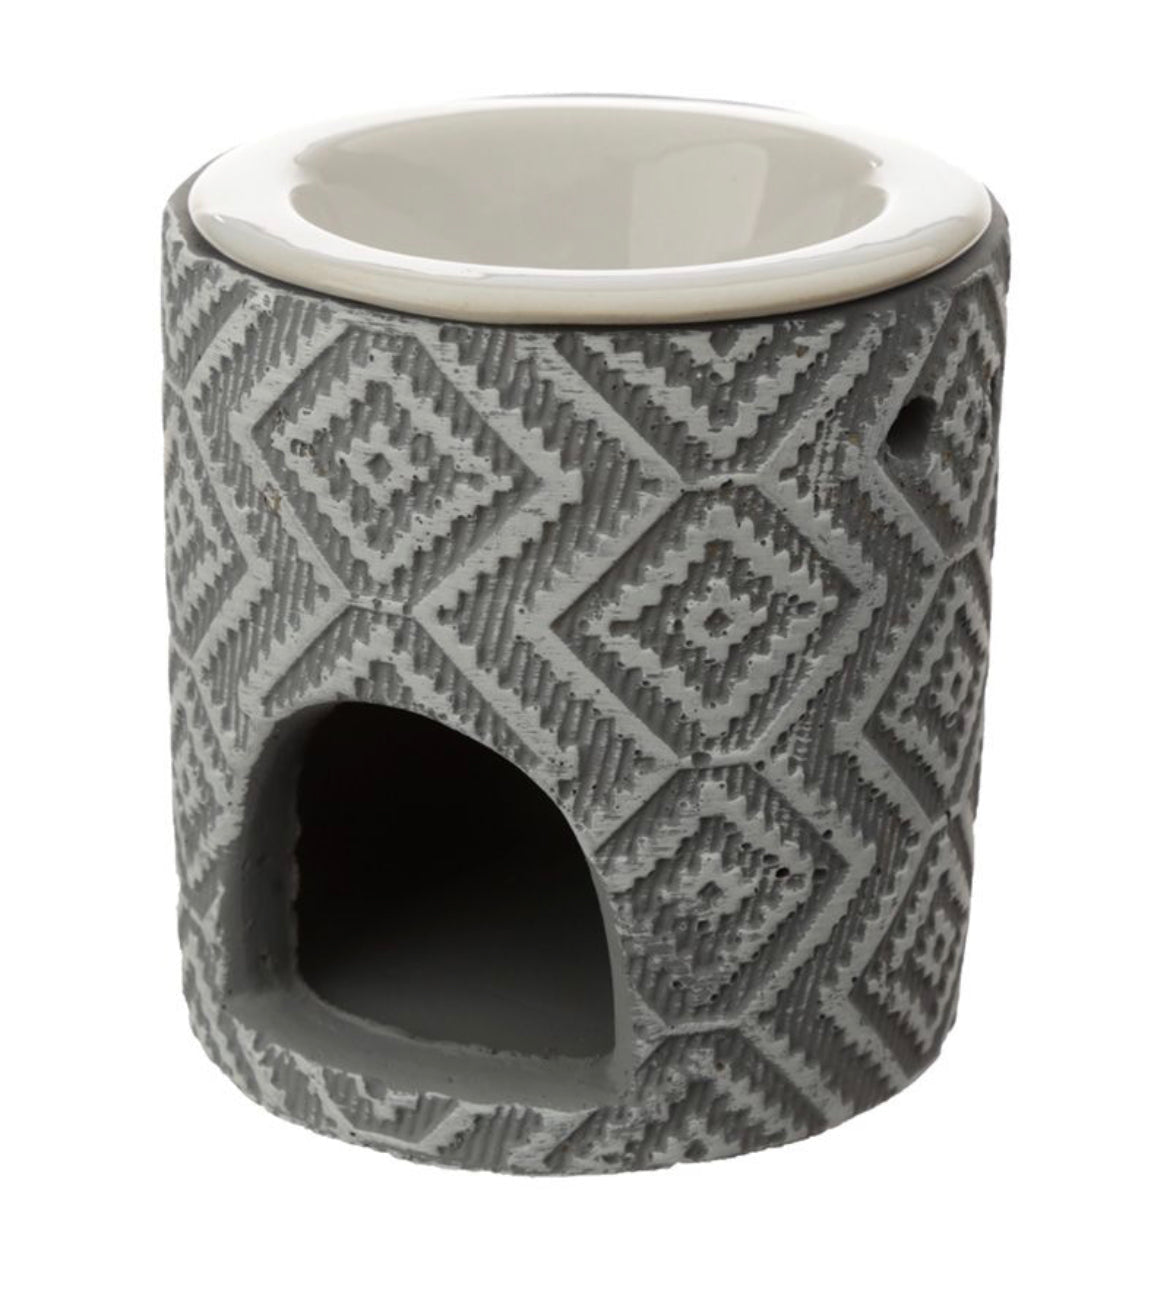 Grey Patterned Concrete Wax Burner with Ceramic Dish Wasson Wax